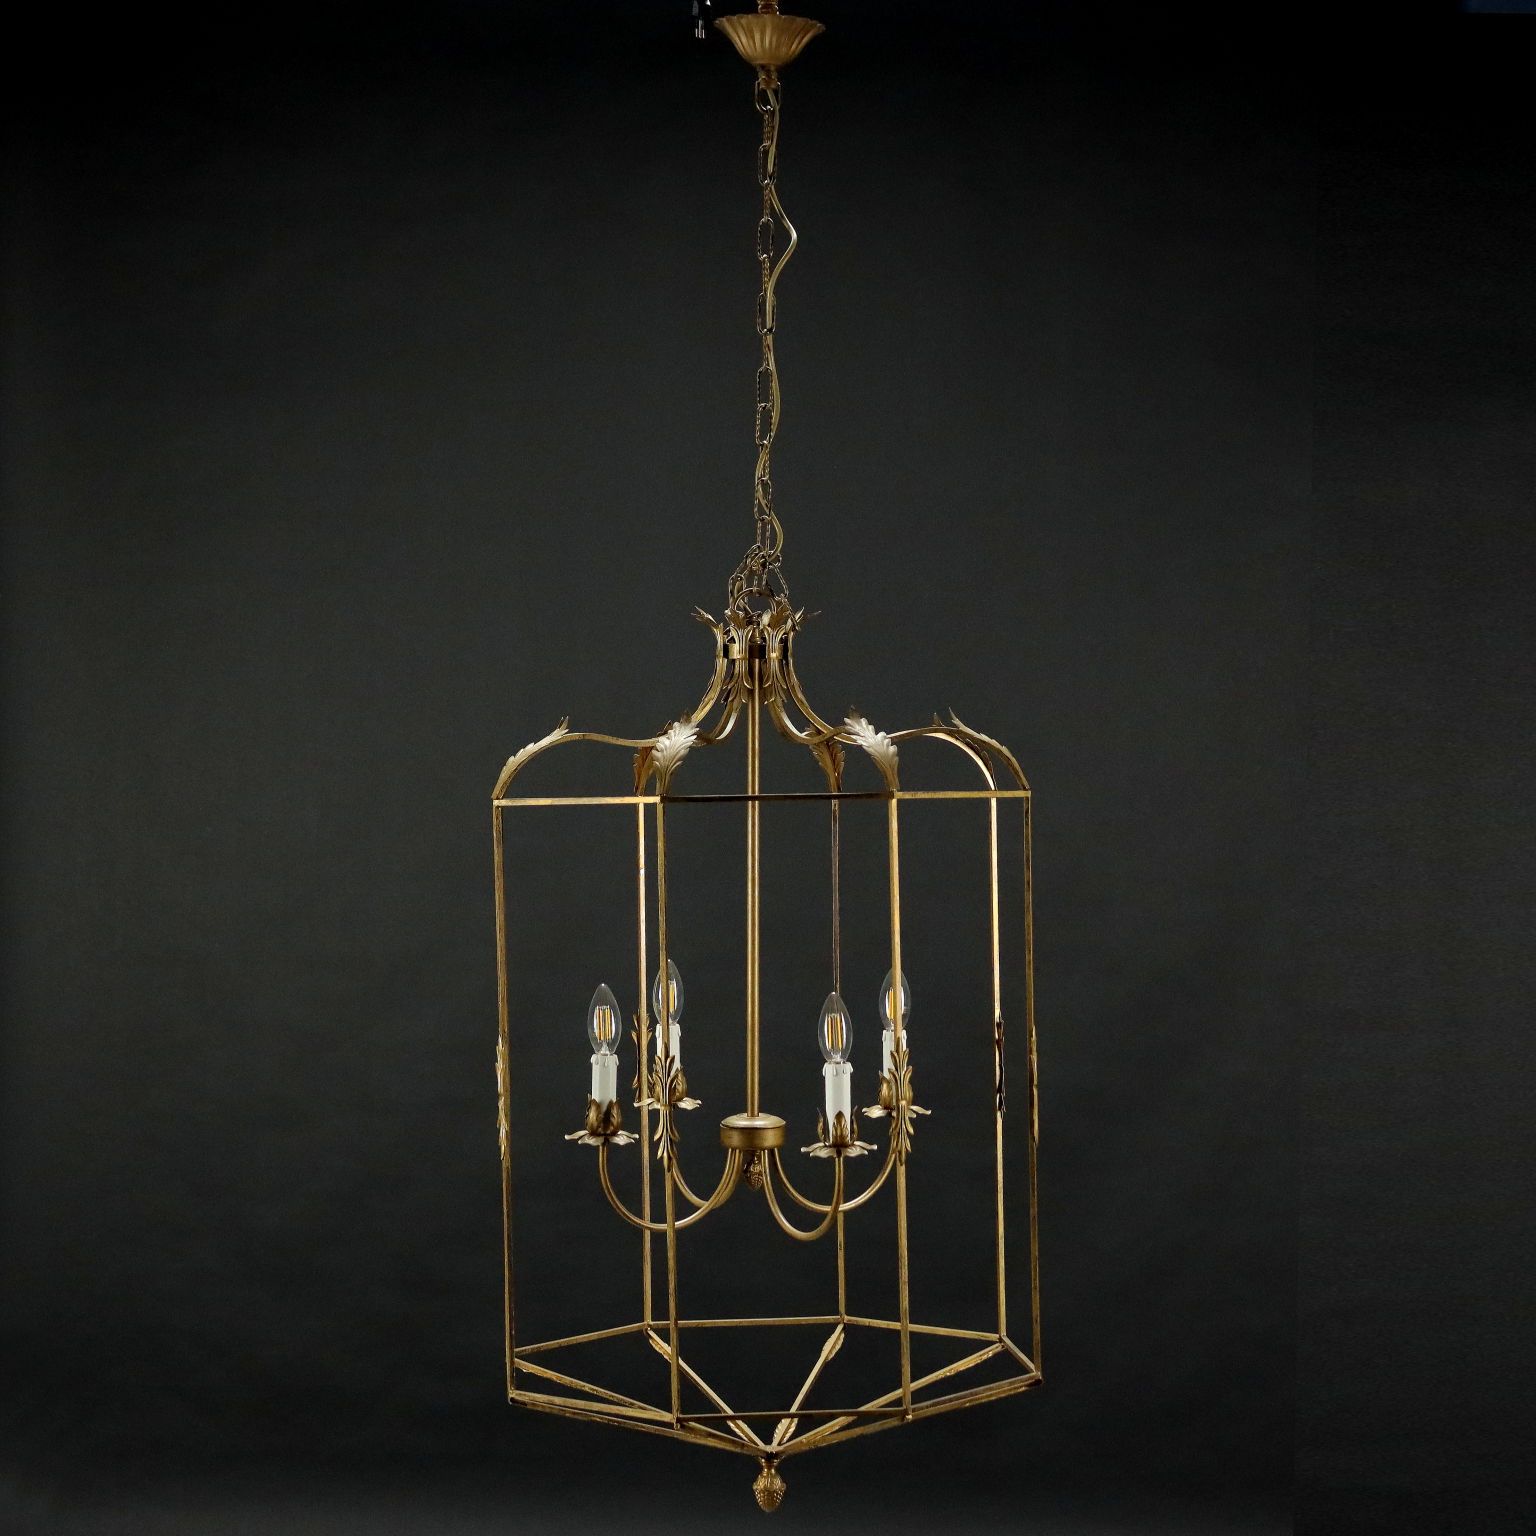 Antique Gild Lantern Chandeliers Within Most Up To Date Chandelier Bronze Italy Xx Century, Italy Early 20th Century, Antiques,  Chandeliers And Lamps, Dimanoinmano (View 1 of 10)